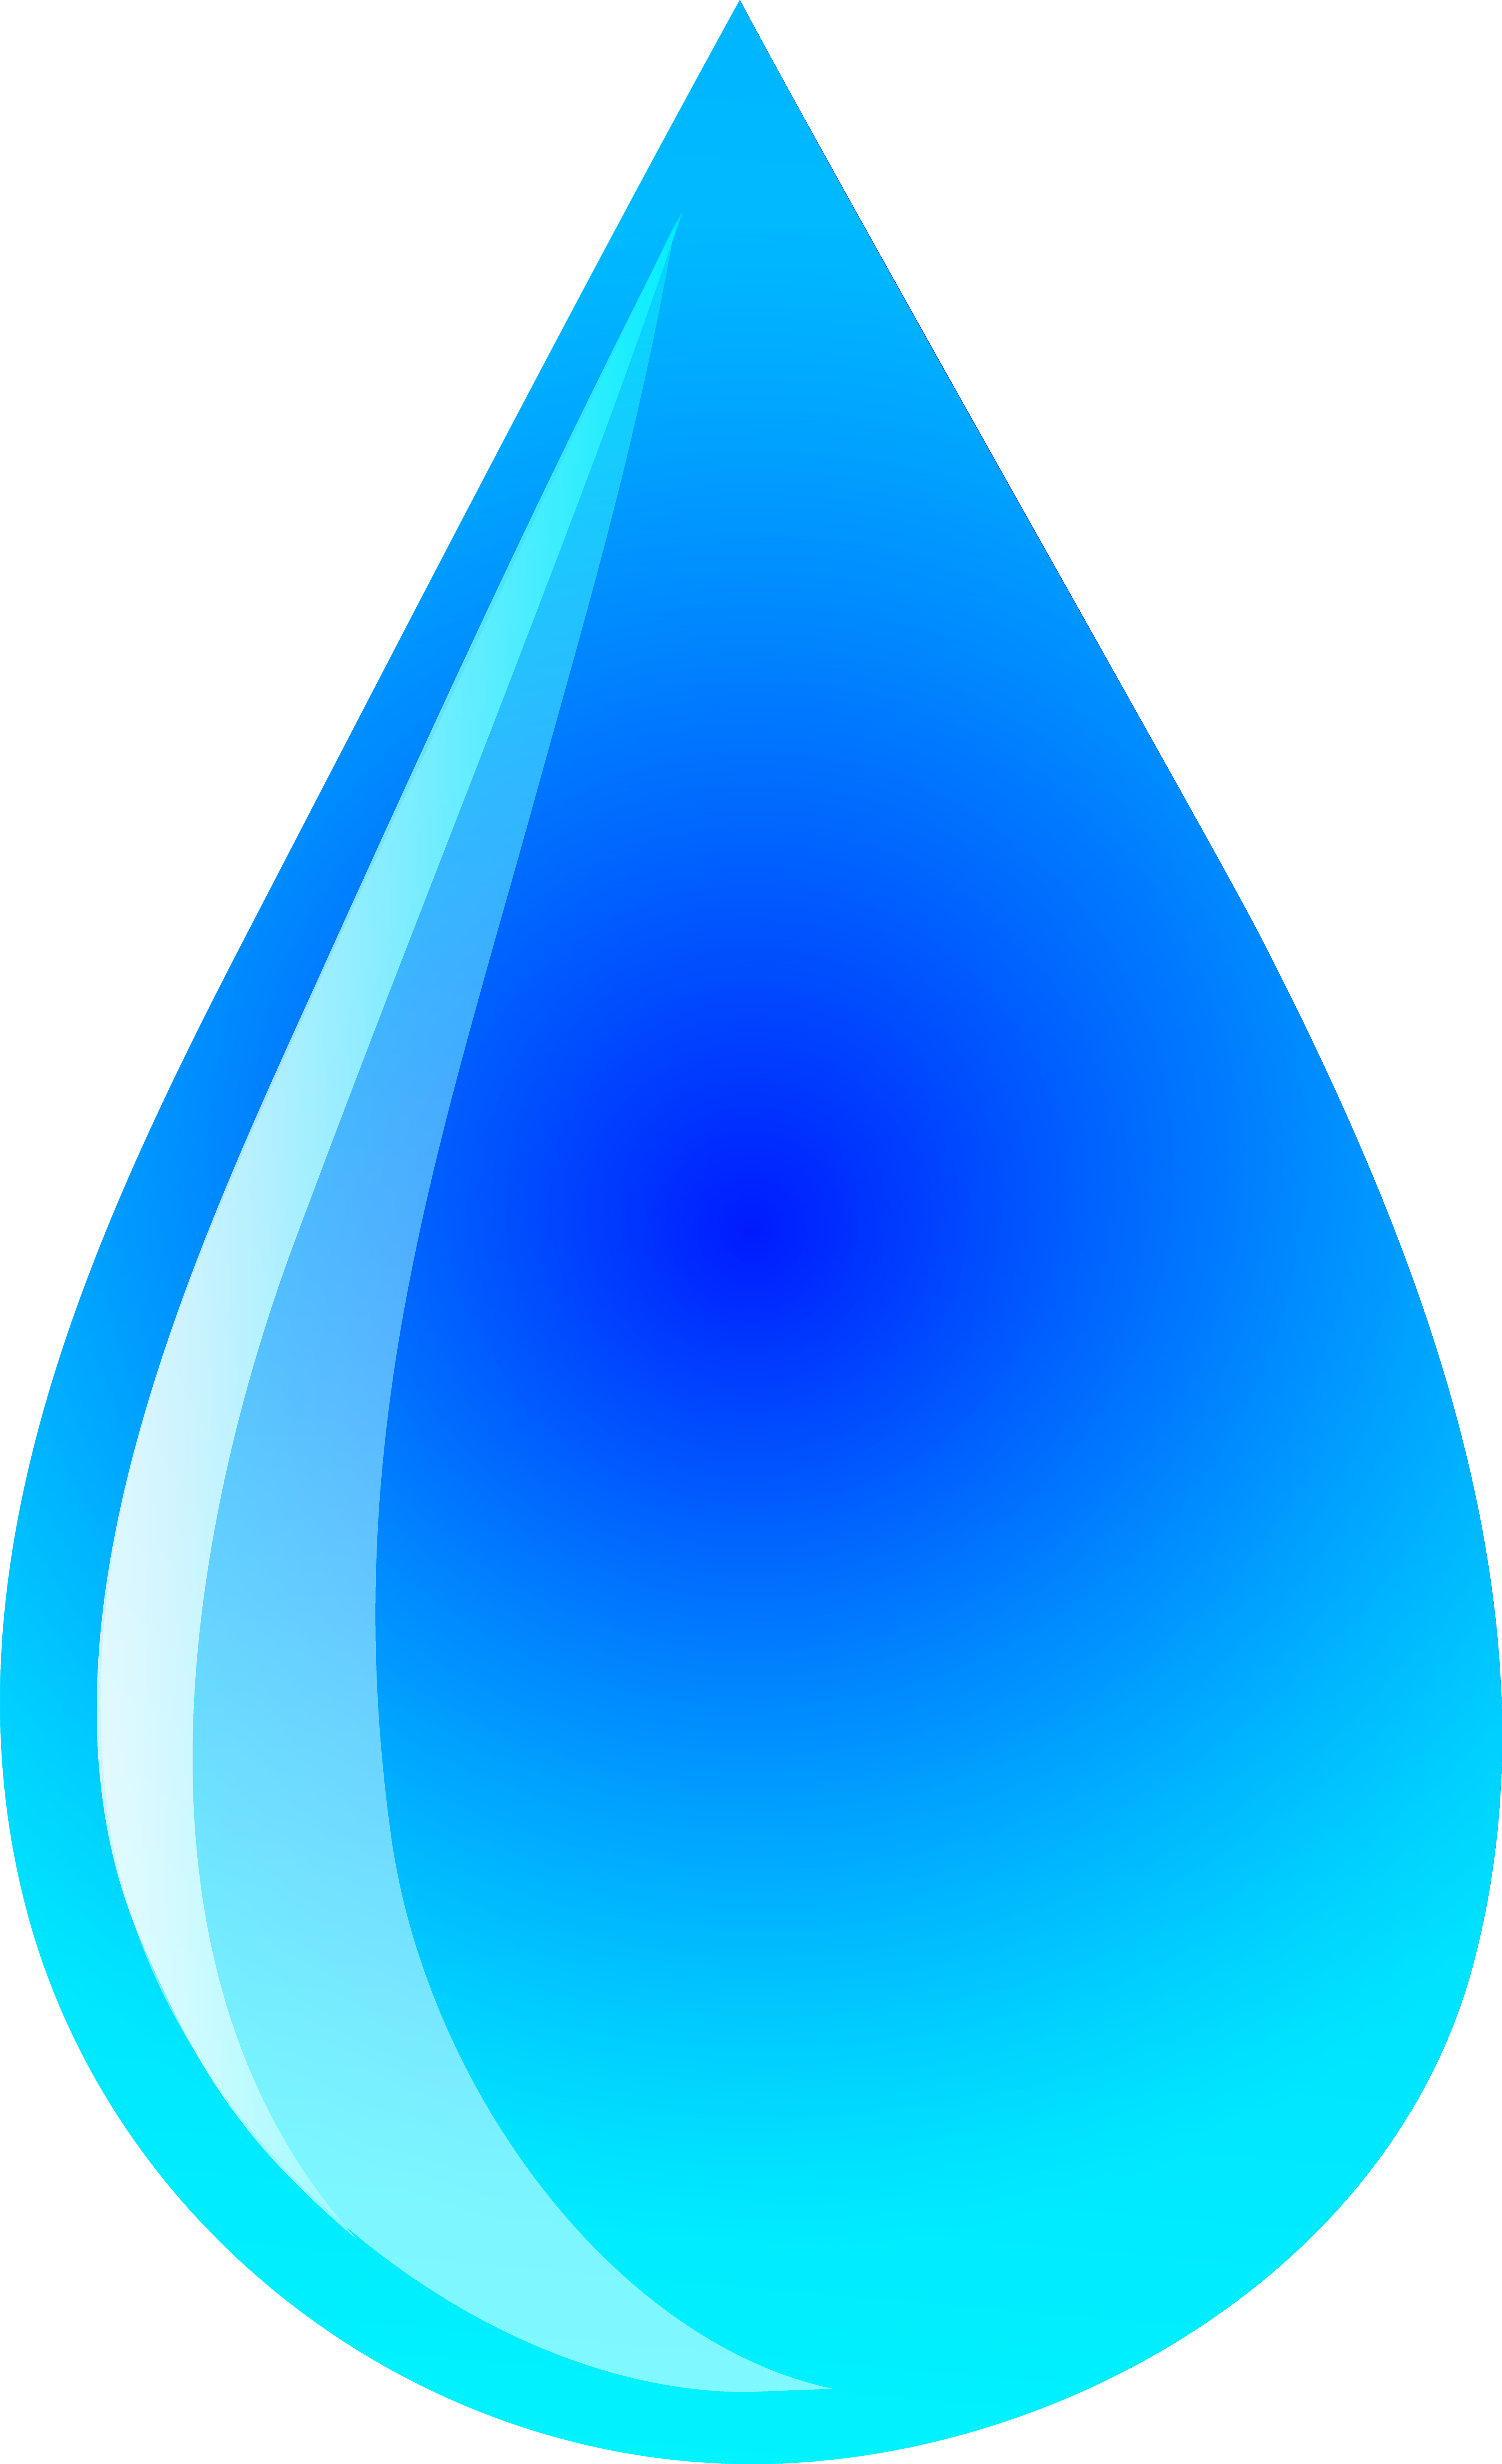 Free Picture Of A Water Droplet, Download Free Clip Art.